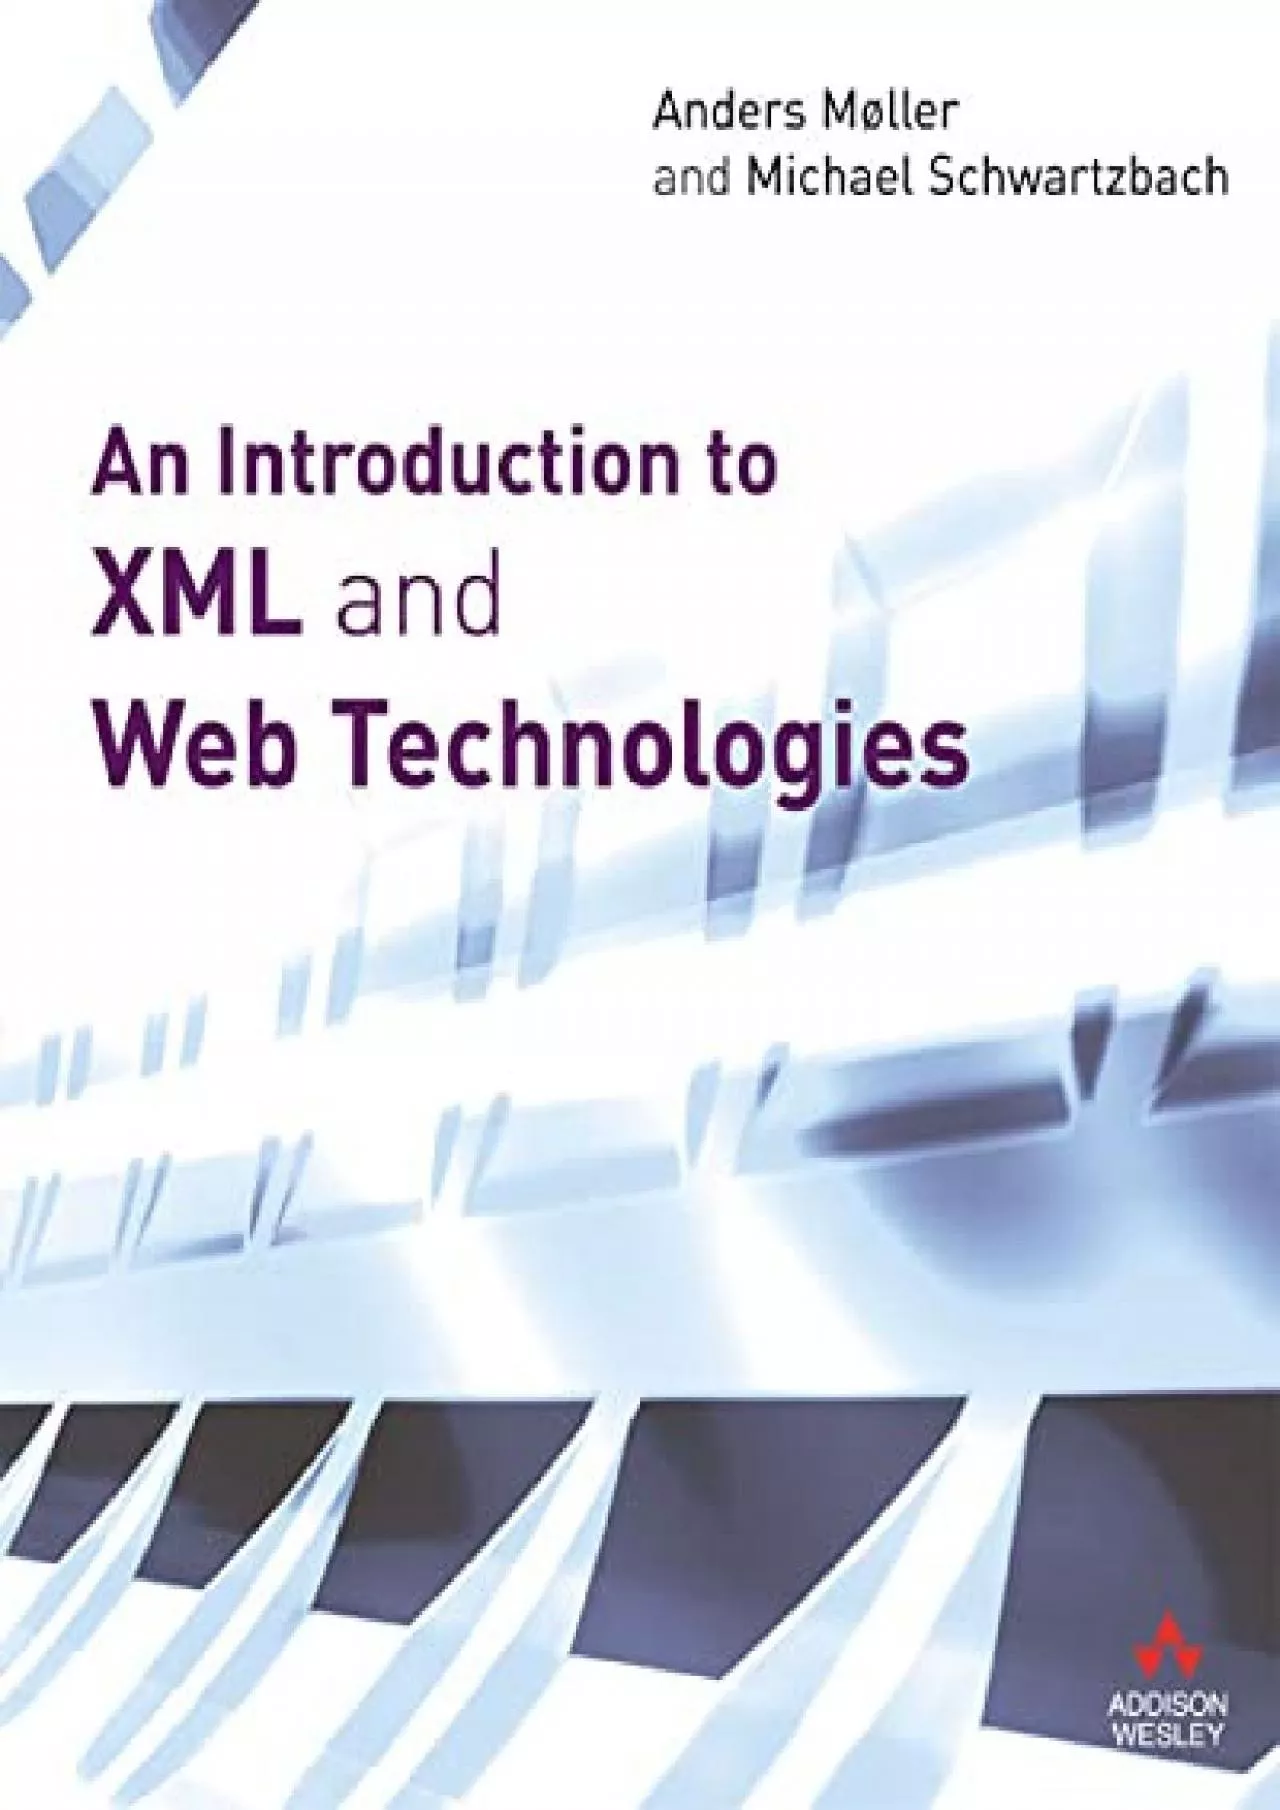 [READING BOOK]-An Introduction to XML and Web Technologies